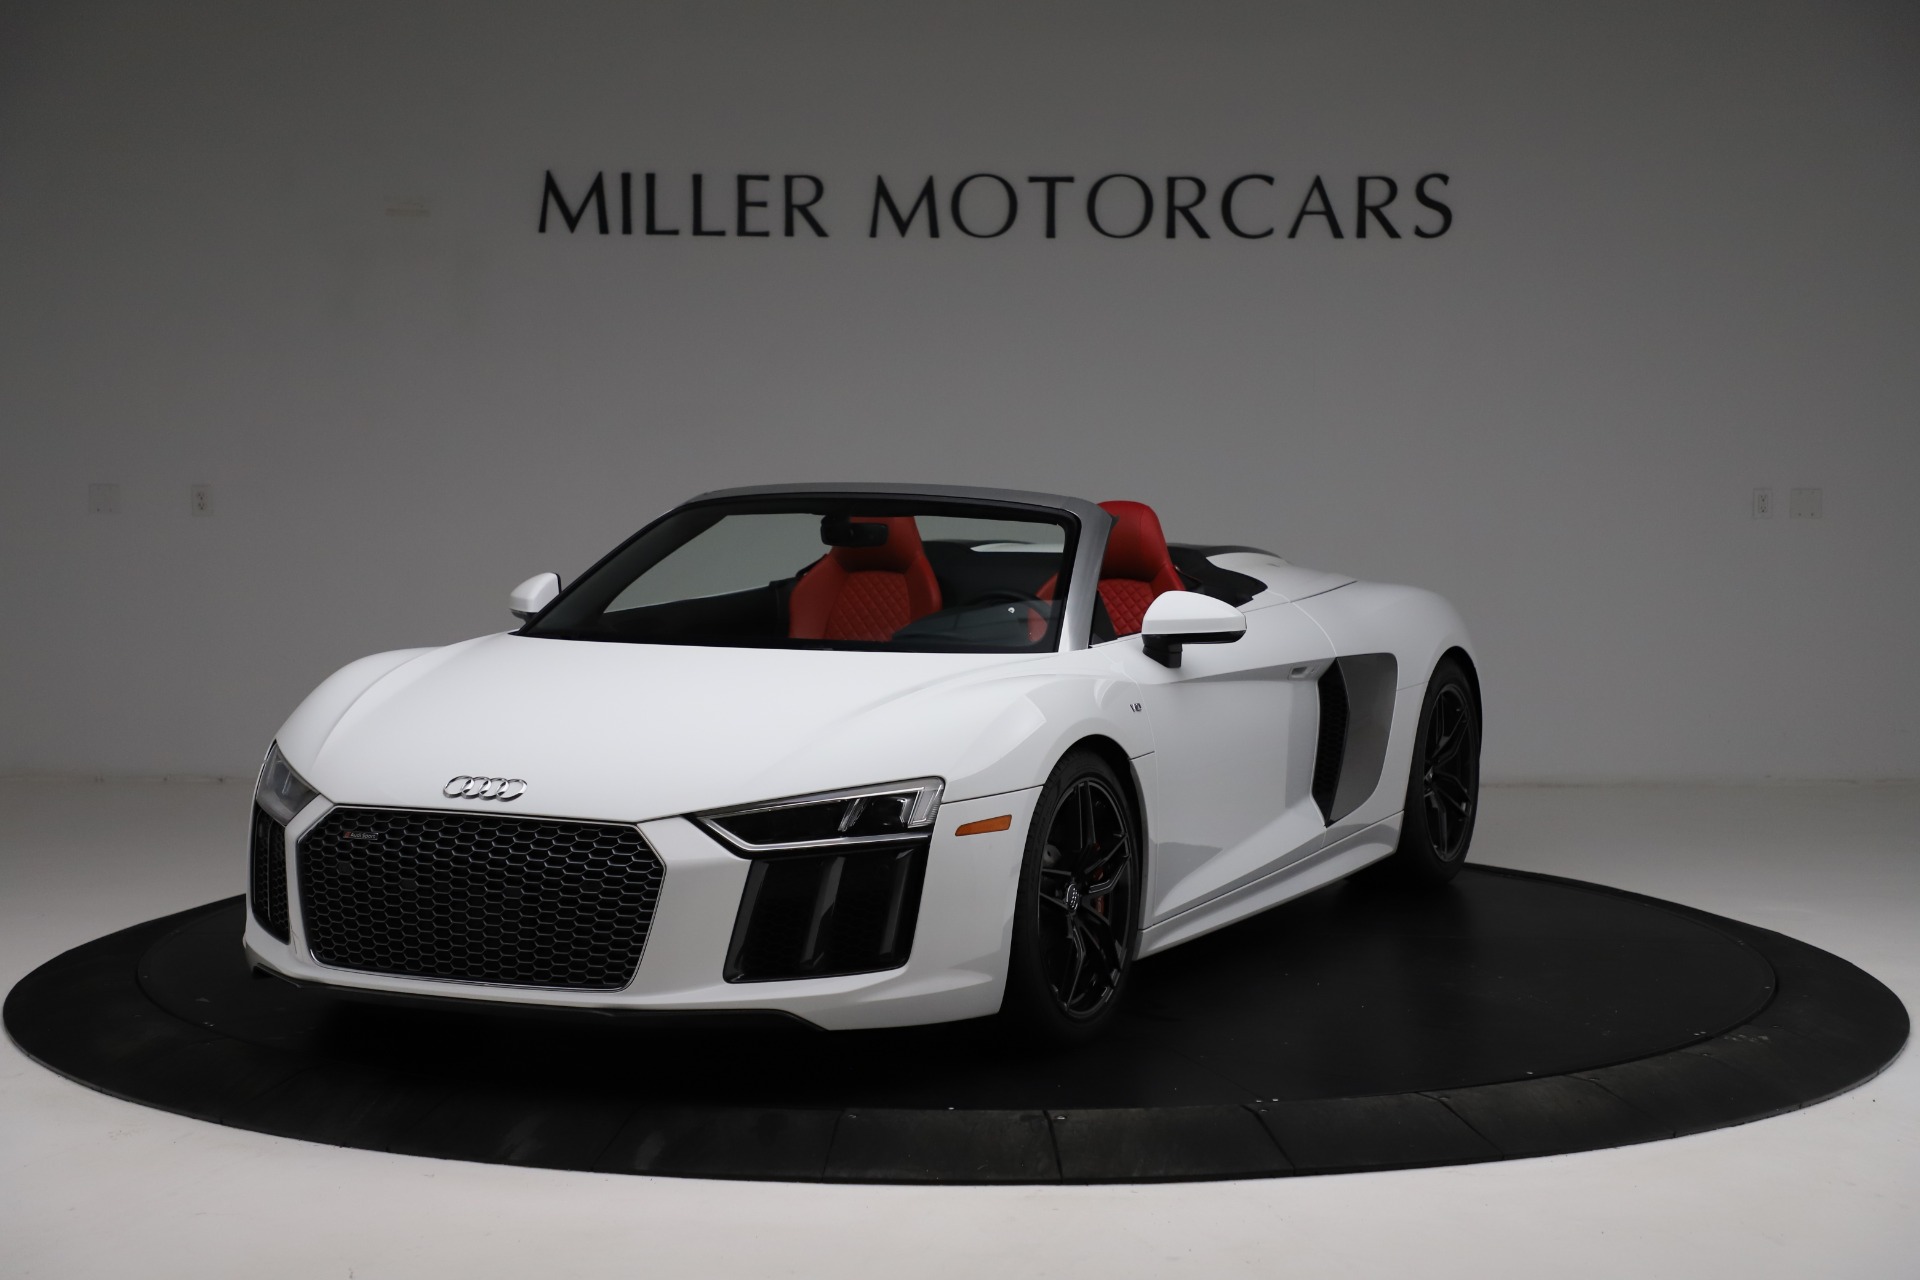 Used 2018 Audi R8 Spyder for sale Sold at Bentley Greenwich in Greenwich CT 06830 1